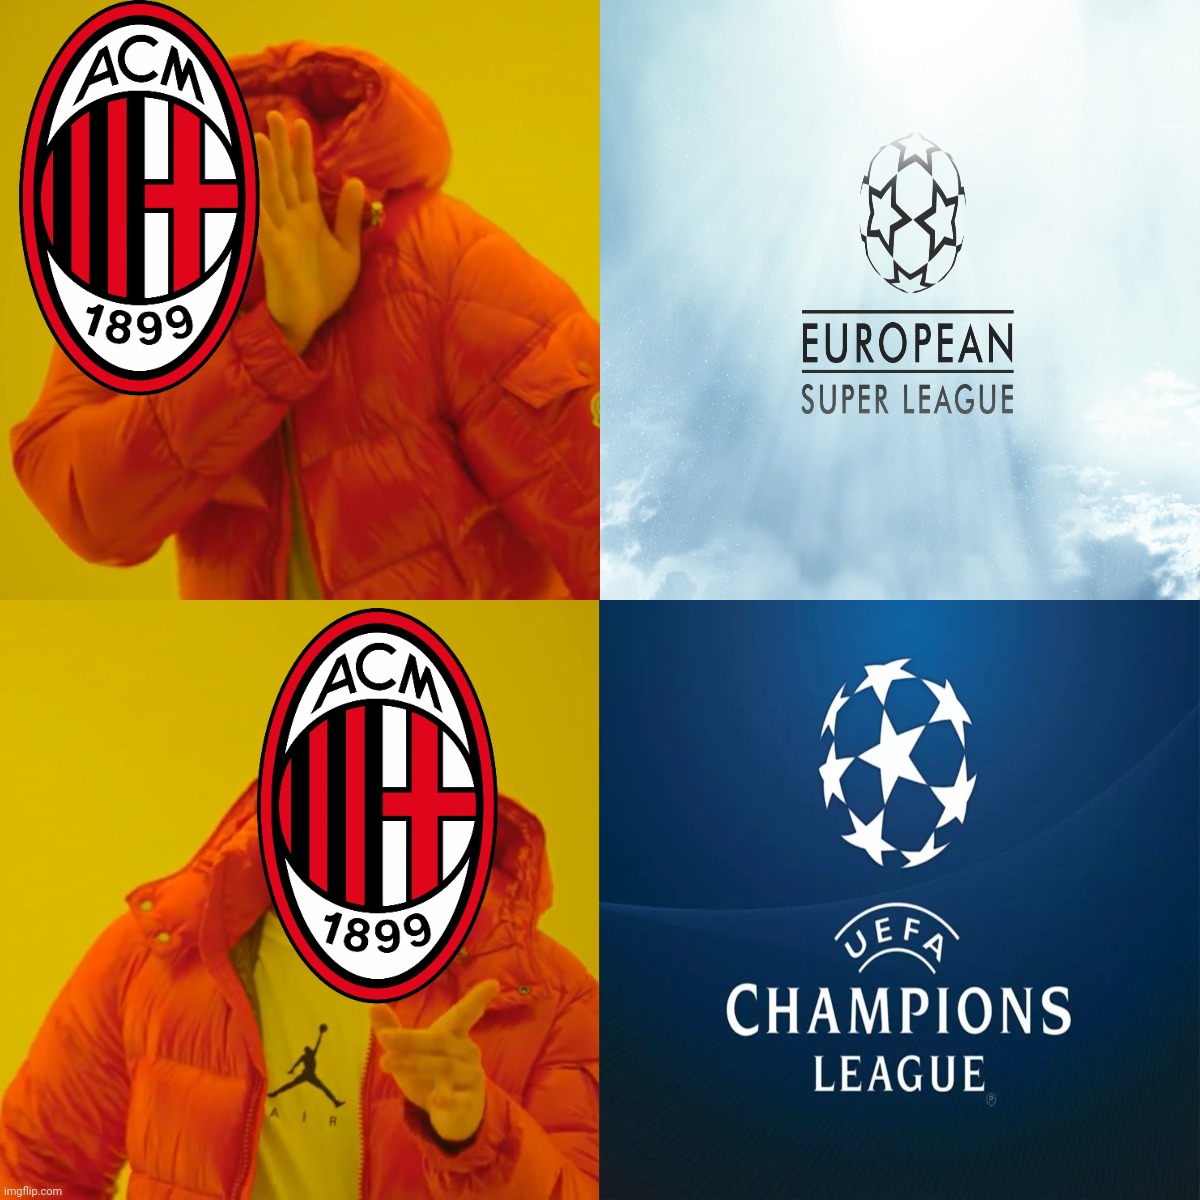 GO AC MILAN GO | image tagged in memes,ac milan,no to european super league | made w/ Imgflip meme maker